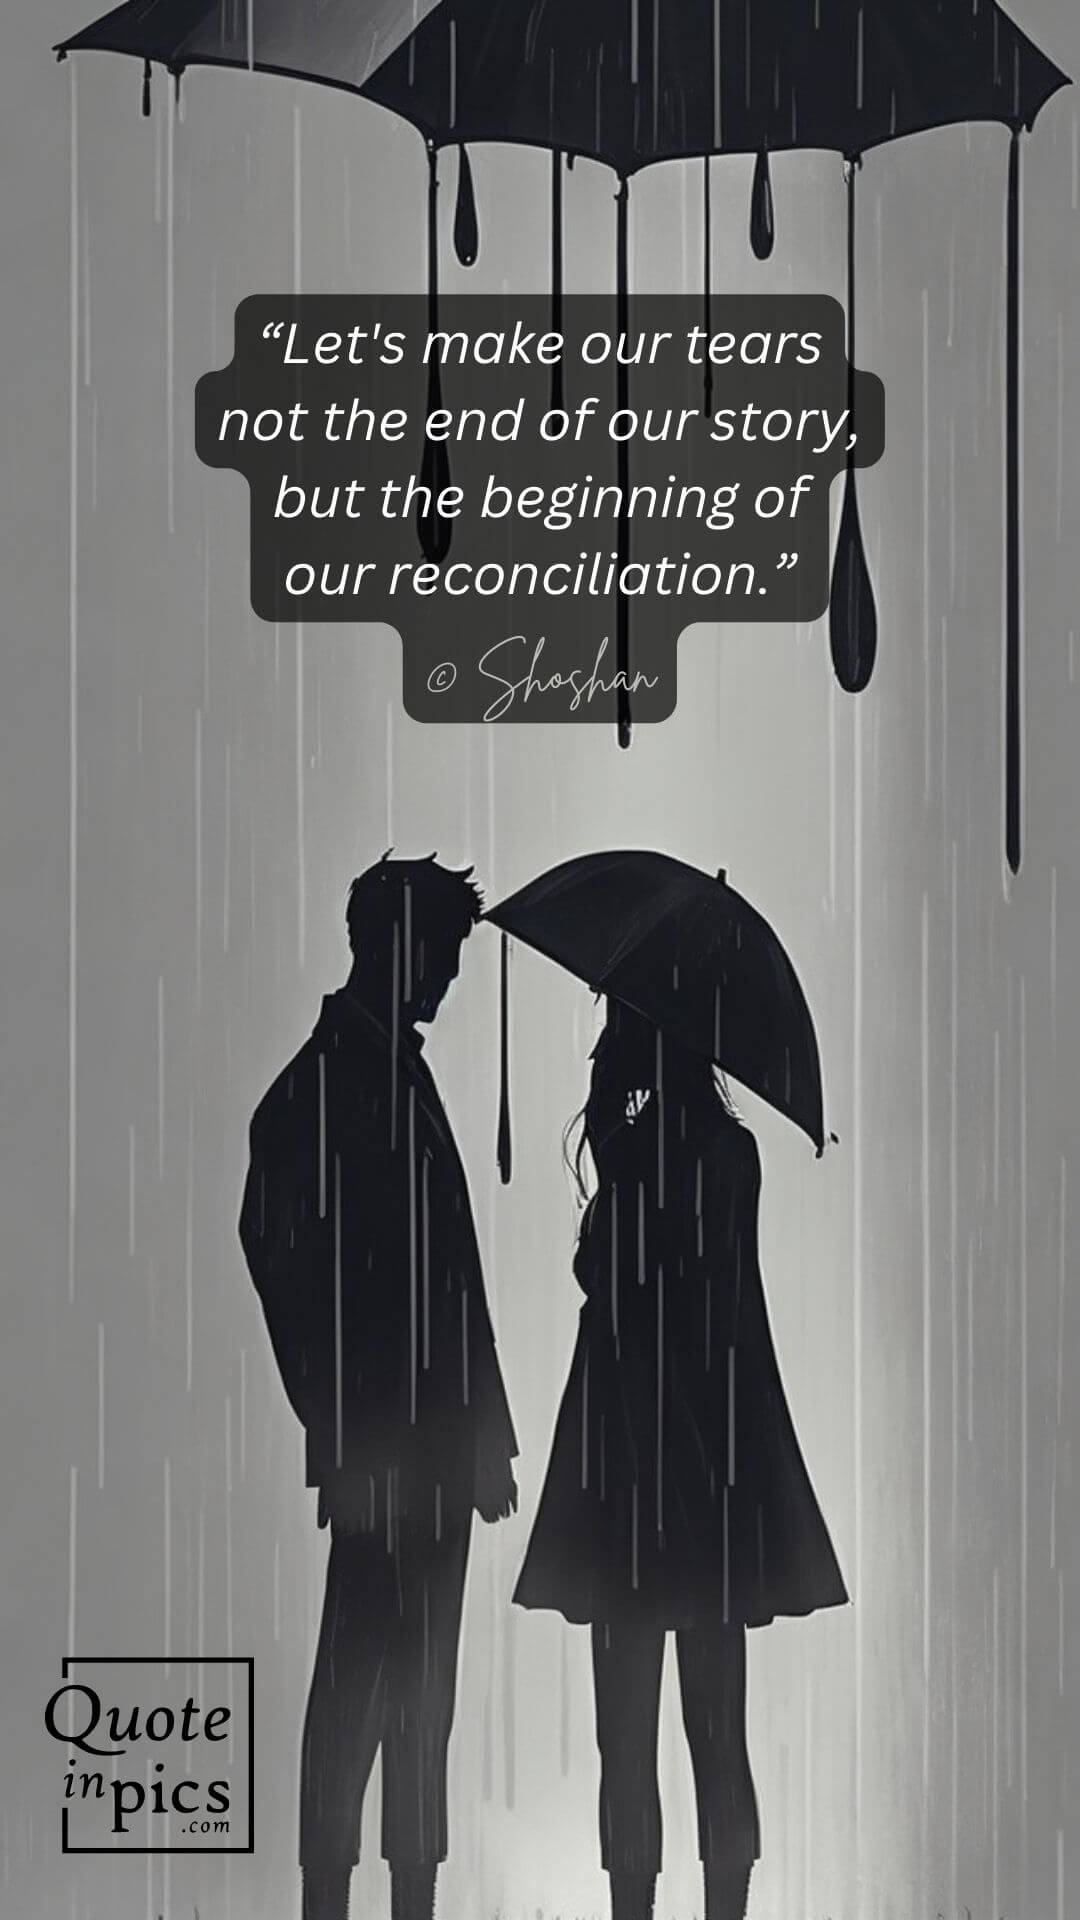 Let's make our tears not the end of our story, but the beginning of our reconciliation - Shoshan